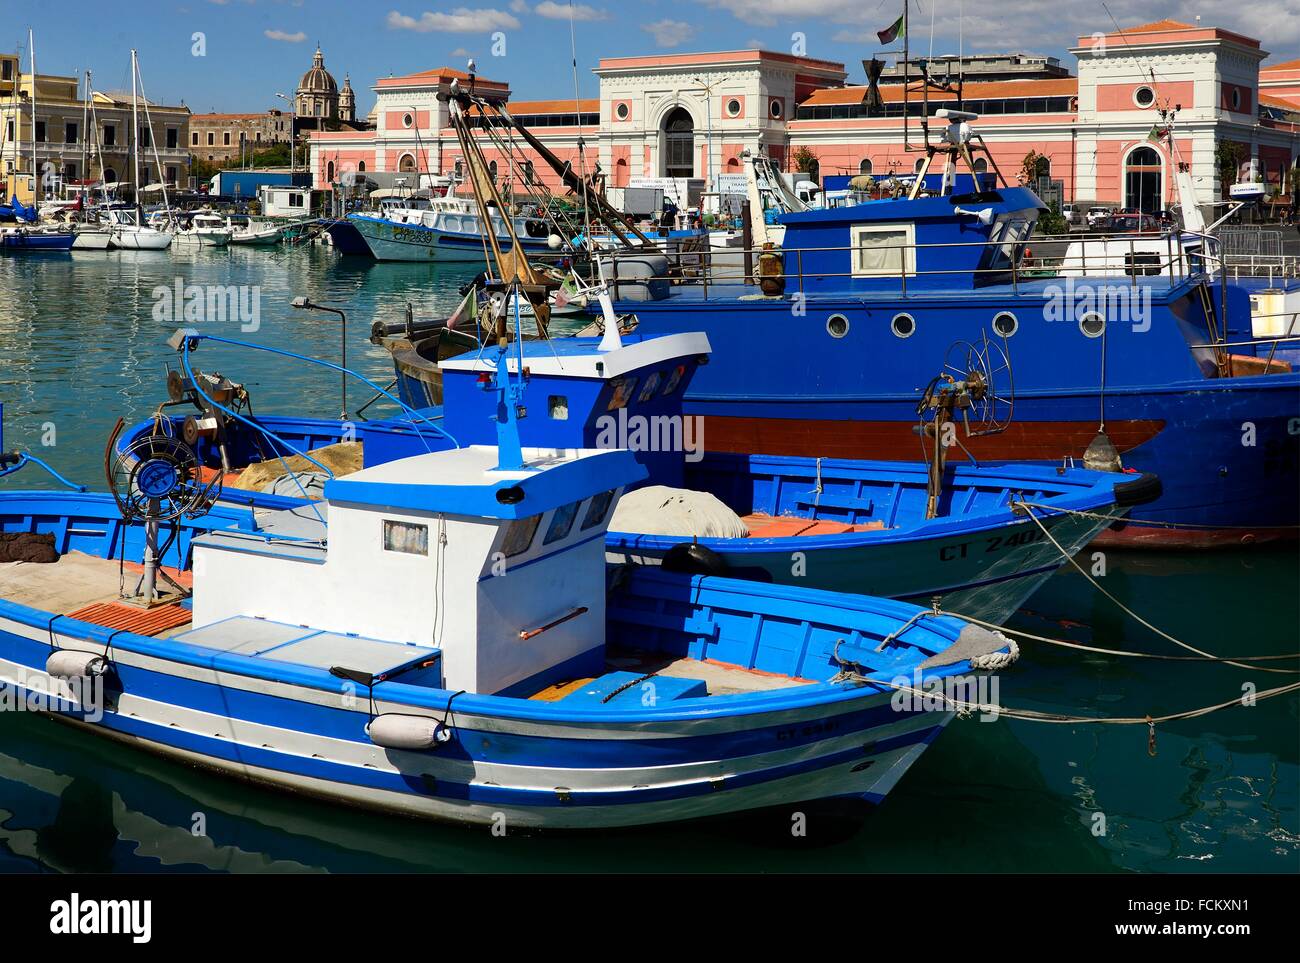 Catania harbour, fishing boats, old town and dome of famous Cathedral in far background, Sicily, Italy. Stock Photo